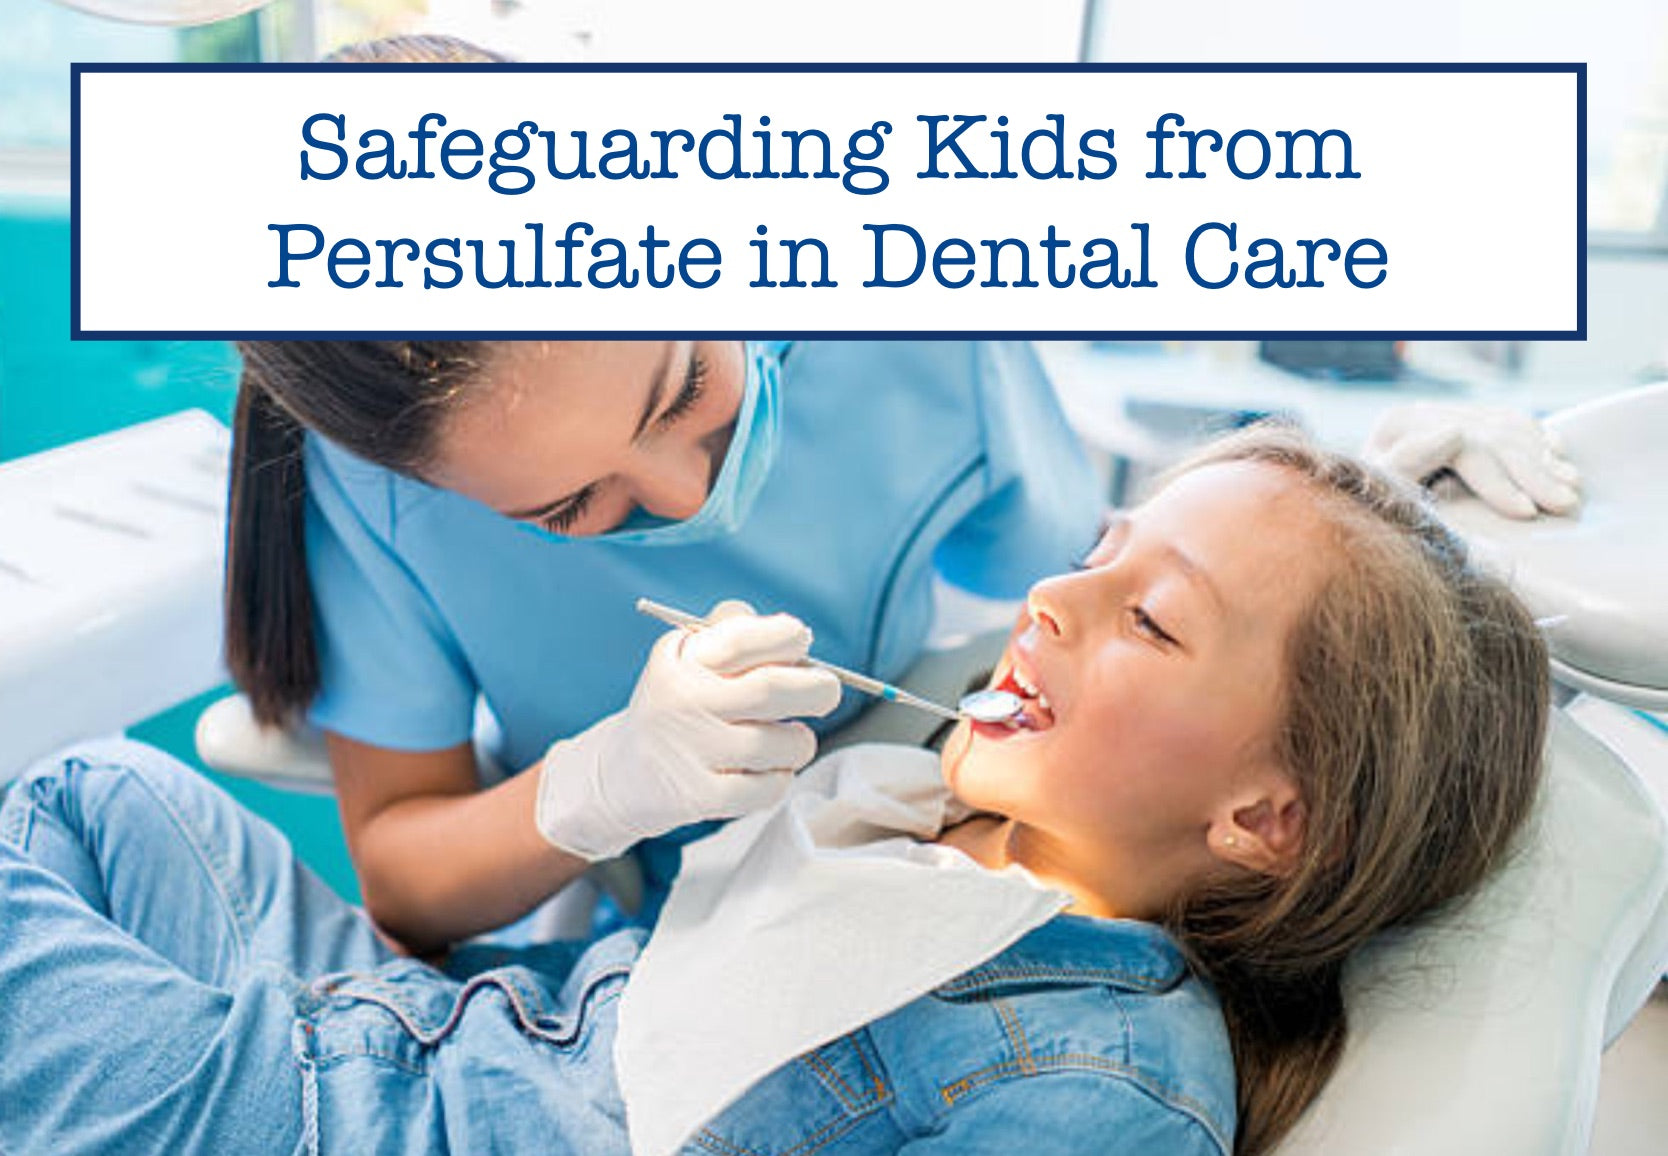 Safeguarding Kids from Persulfate in Dental Care